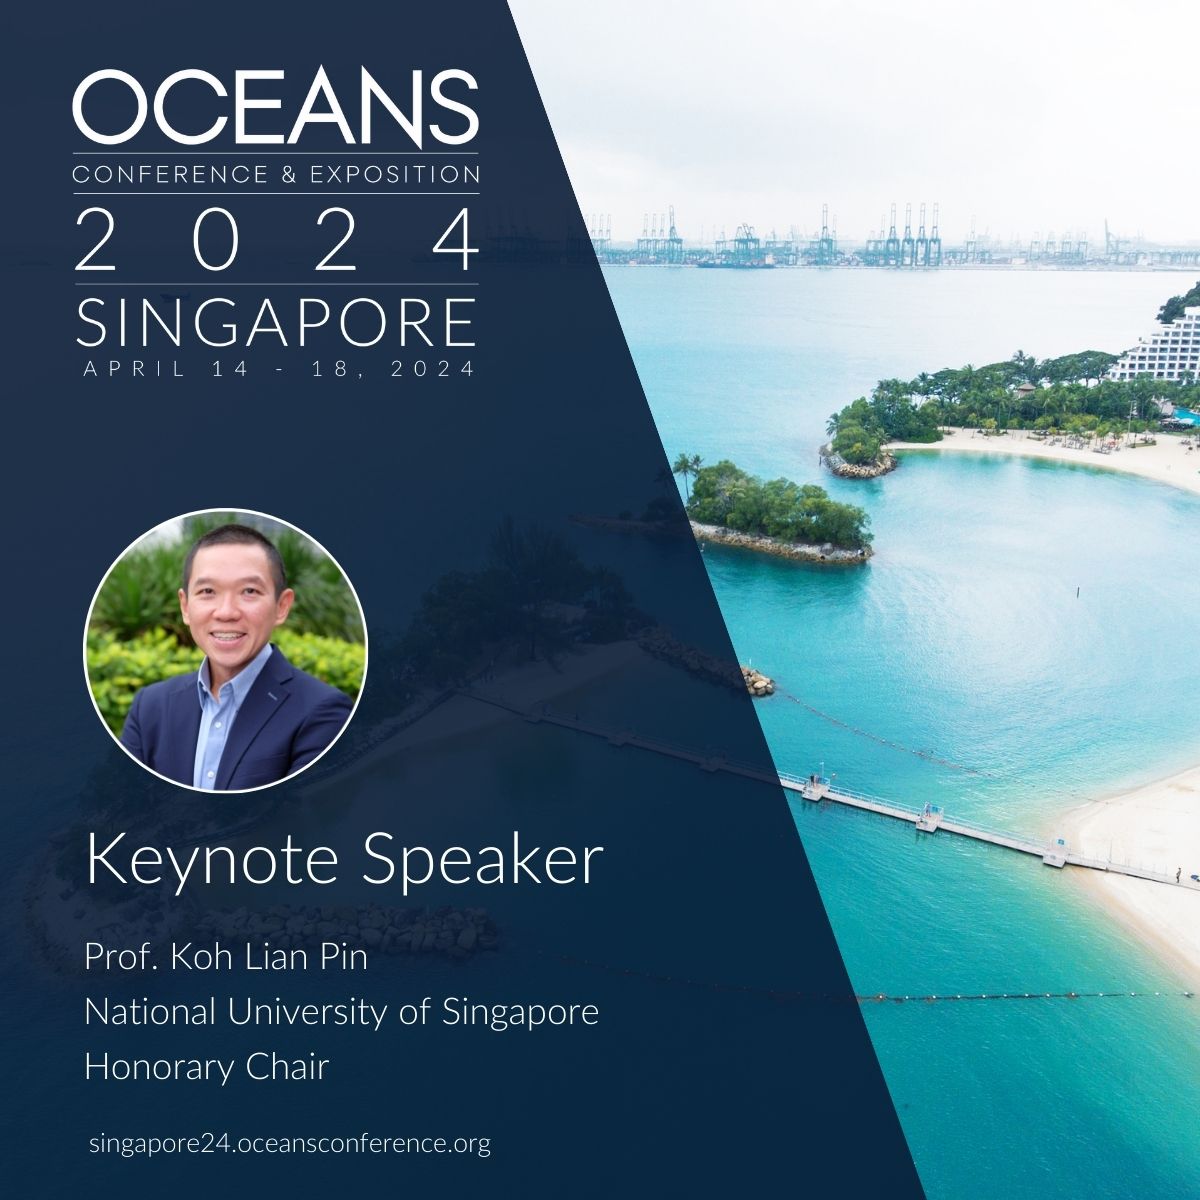 Join us for Professor Koh Lian Pin's keynote, 'Promises and Pitfalls of Nature-based Climate Solutions,' as we navigate these intertwined challenges. Have you registered? singapore24.oceansconference.org/experience/reg… #ClimateChange #OCEANS2024Singapore #OCEANSfanatic #keynotespeaker